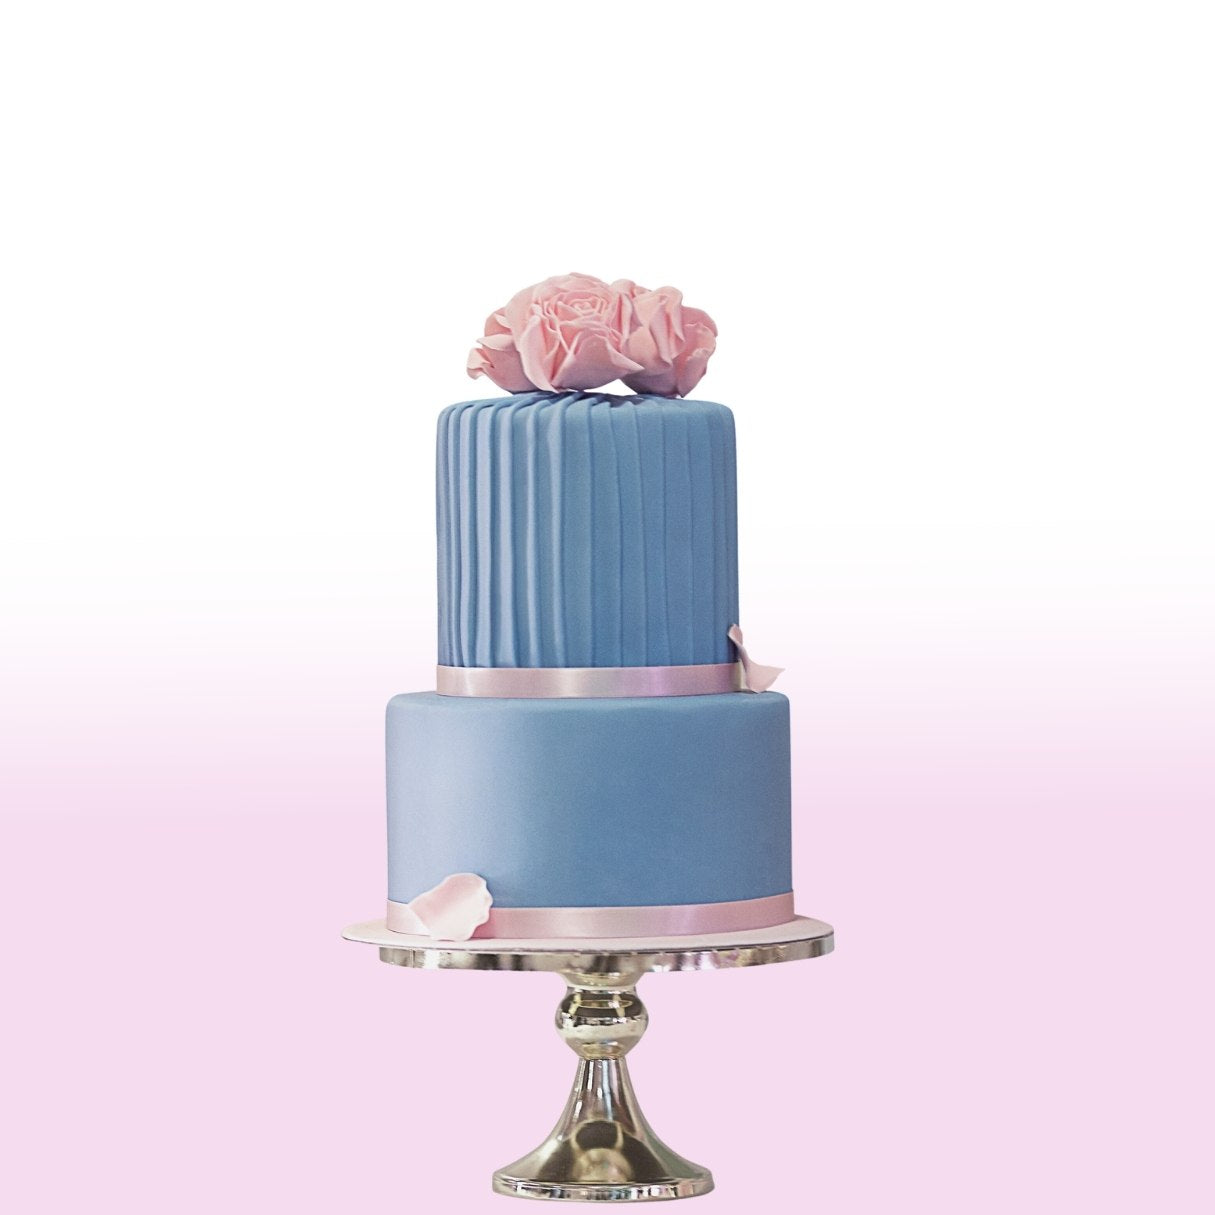 Pink and Blue Cake